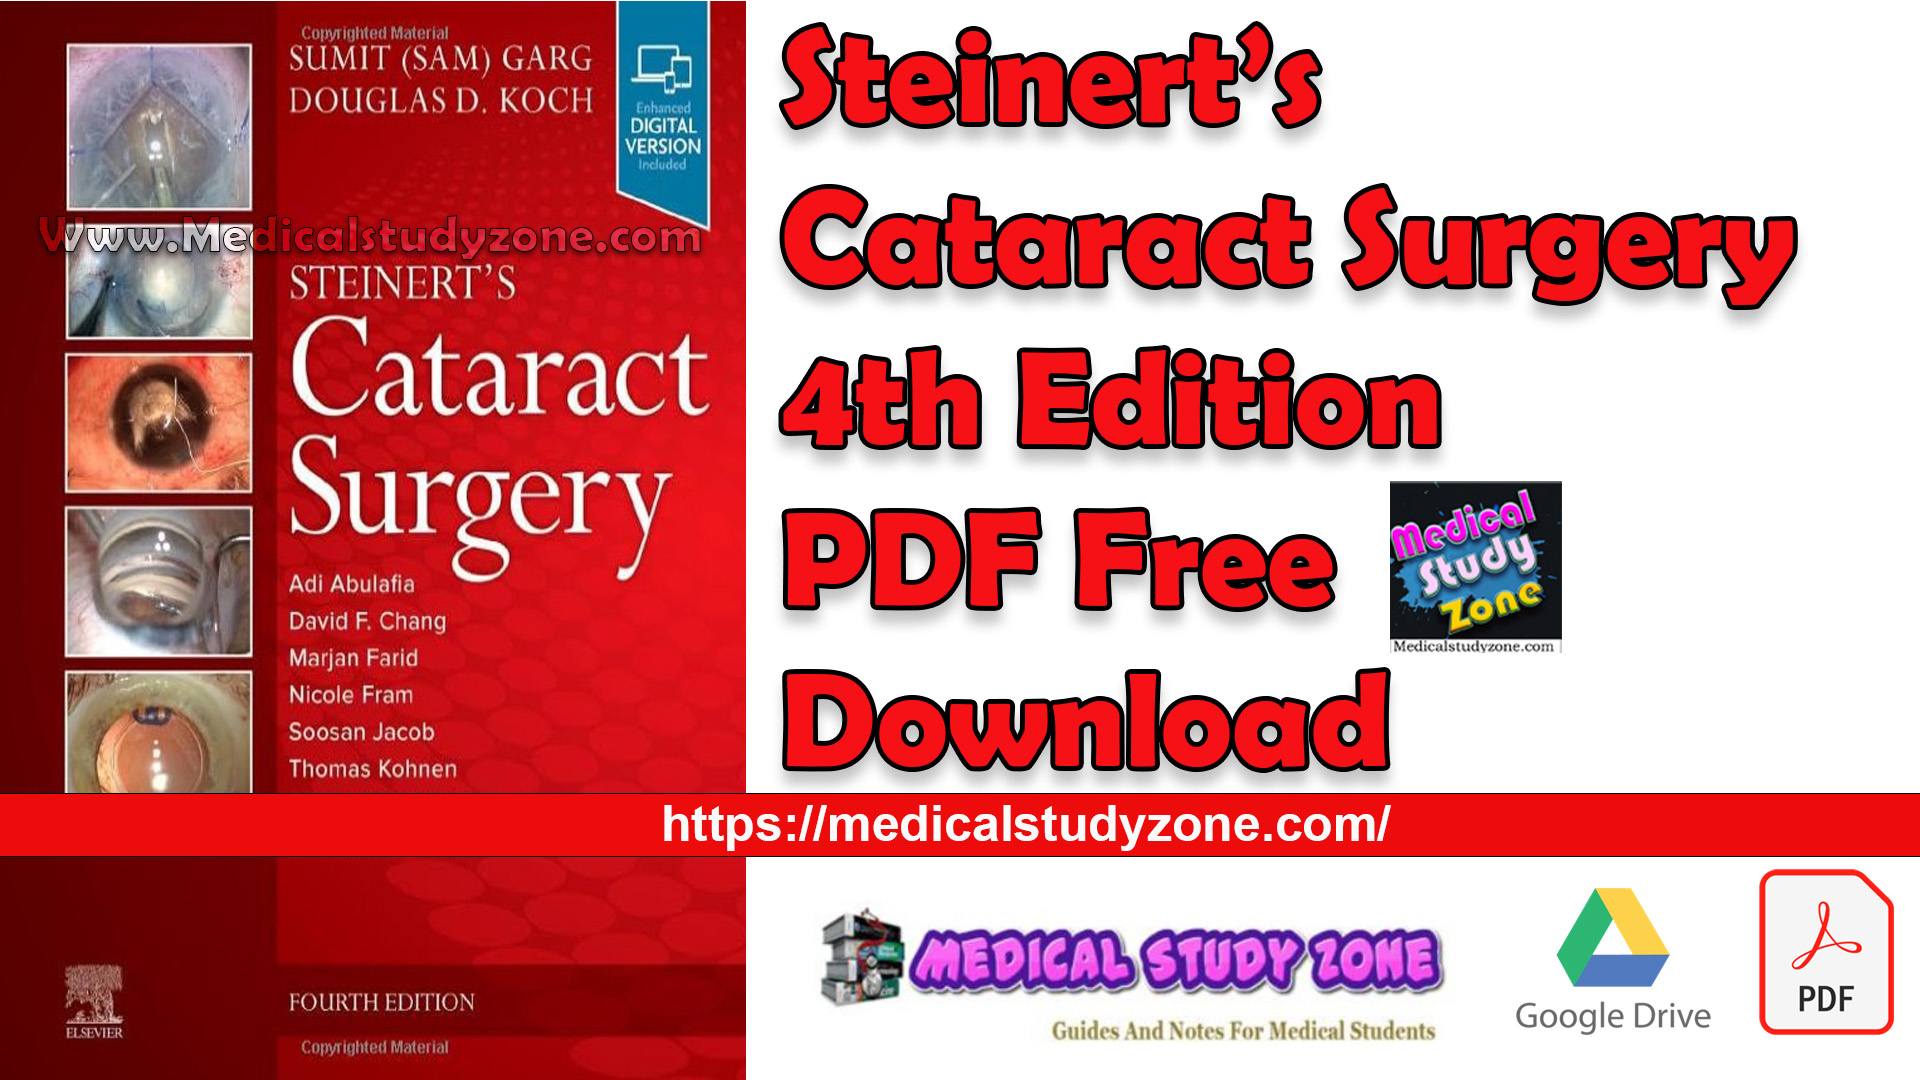 Steinert’s Cataract Surgery 4th Edition PDF Free Download